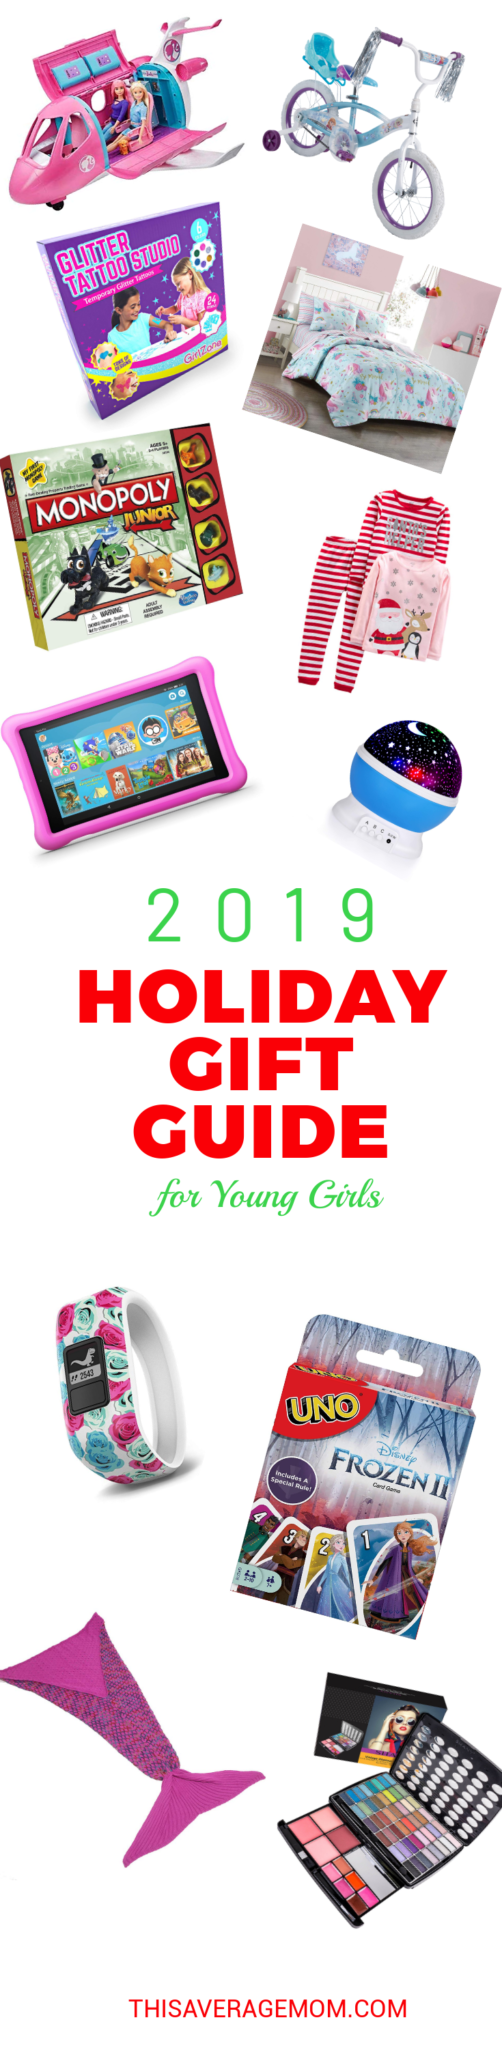 Need some gift ideas for young girls? I have you covered! Here’s 12 gifts that the young girls in your life will love this Christmas. #christmaslist #santa #holidays